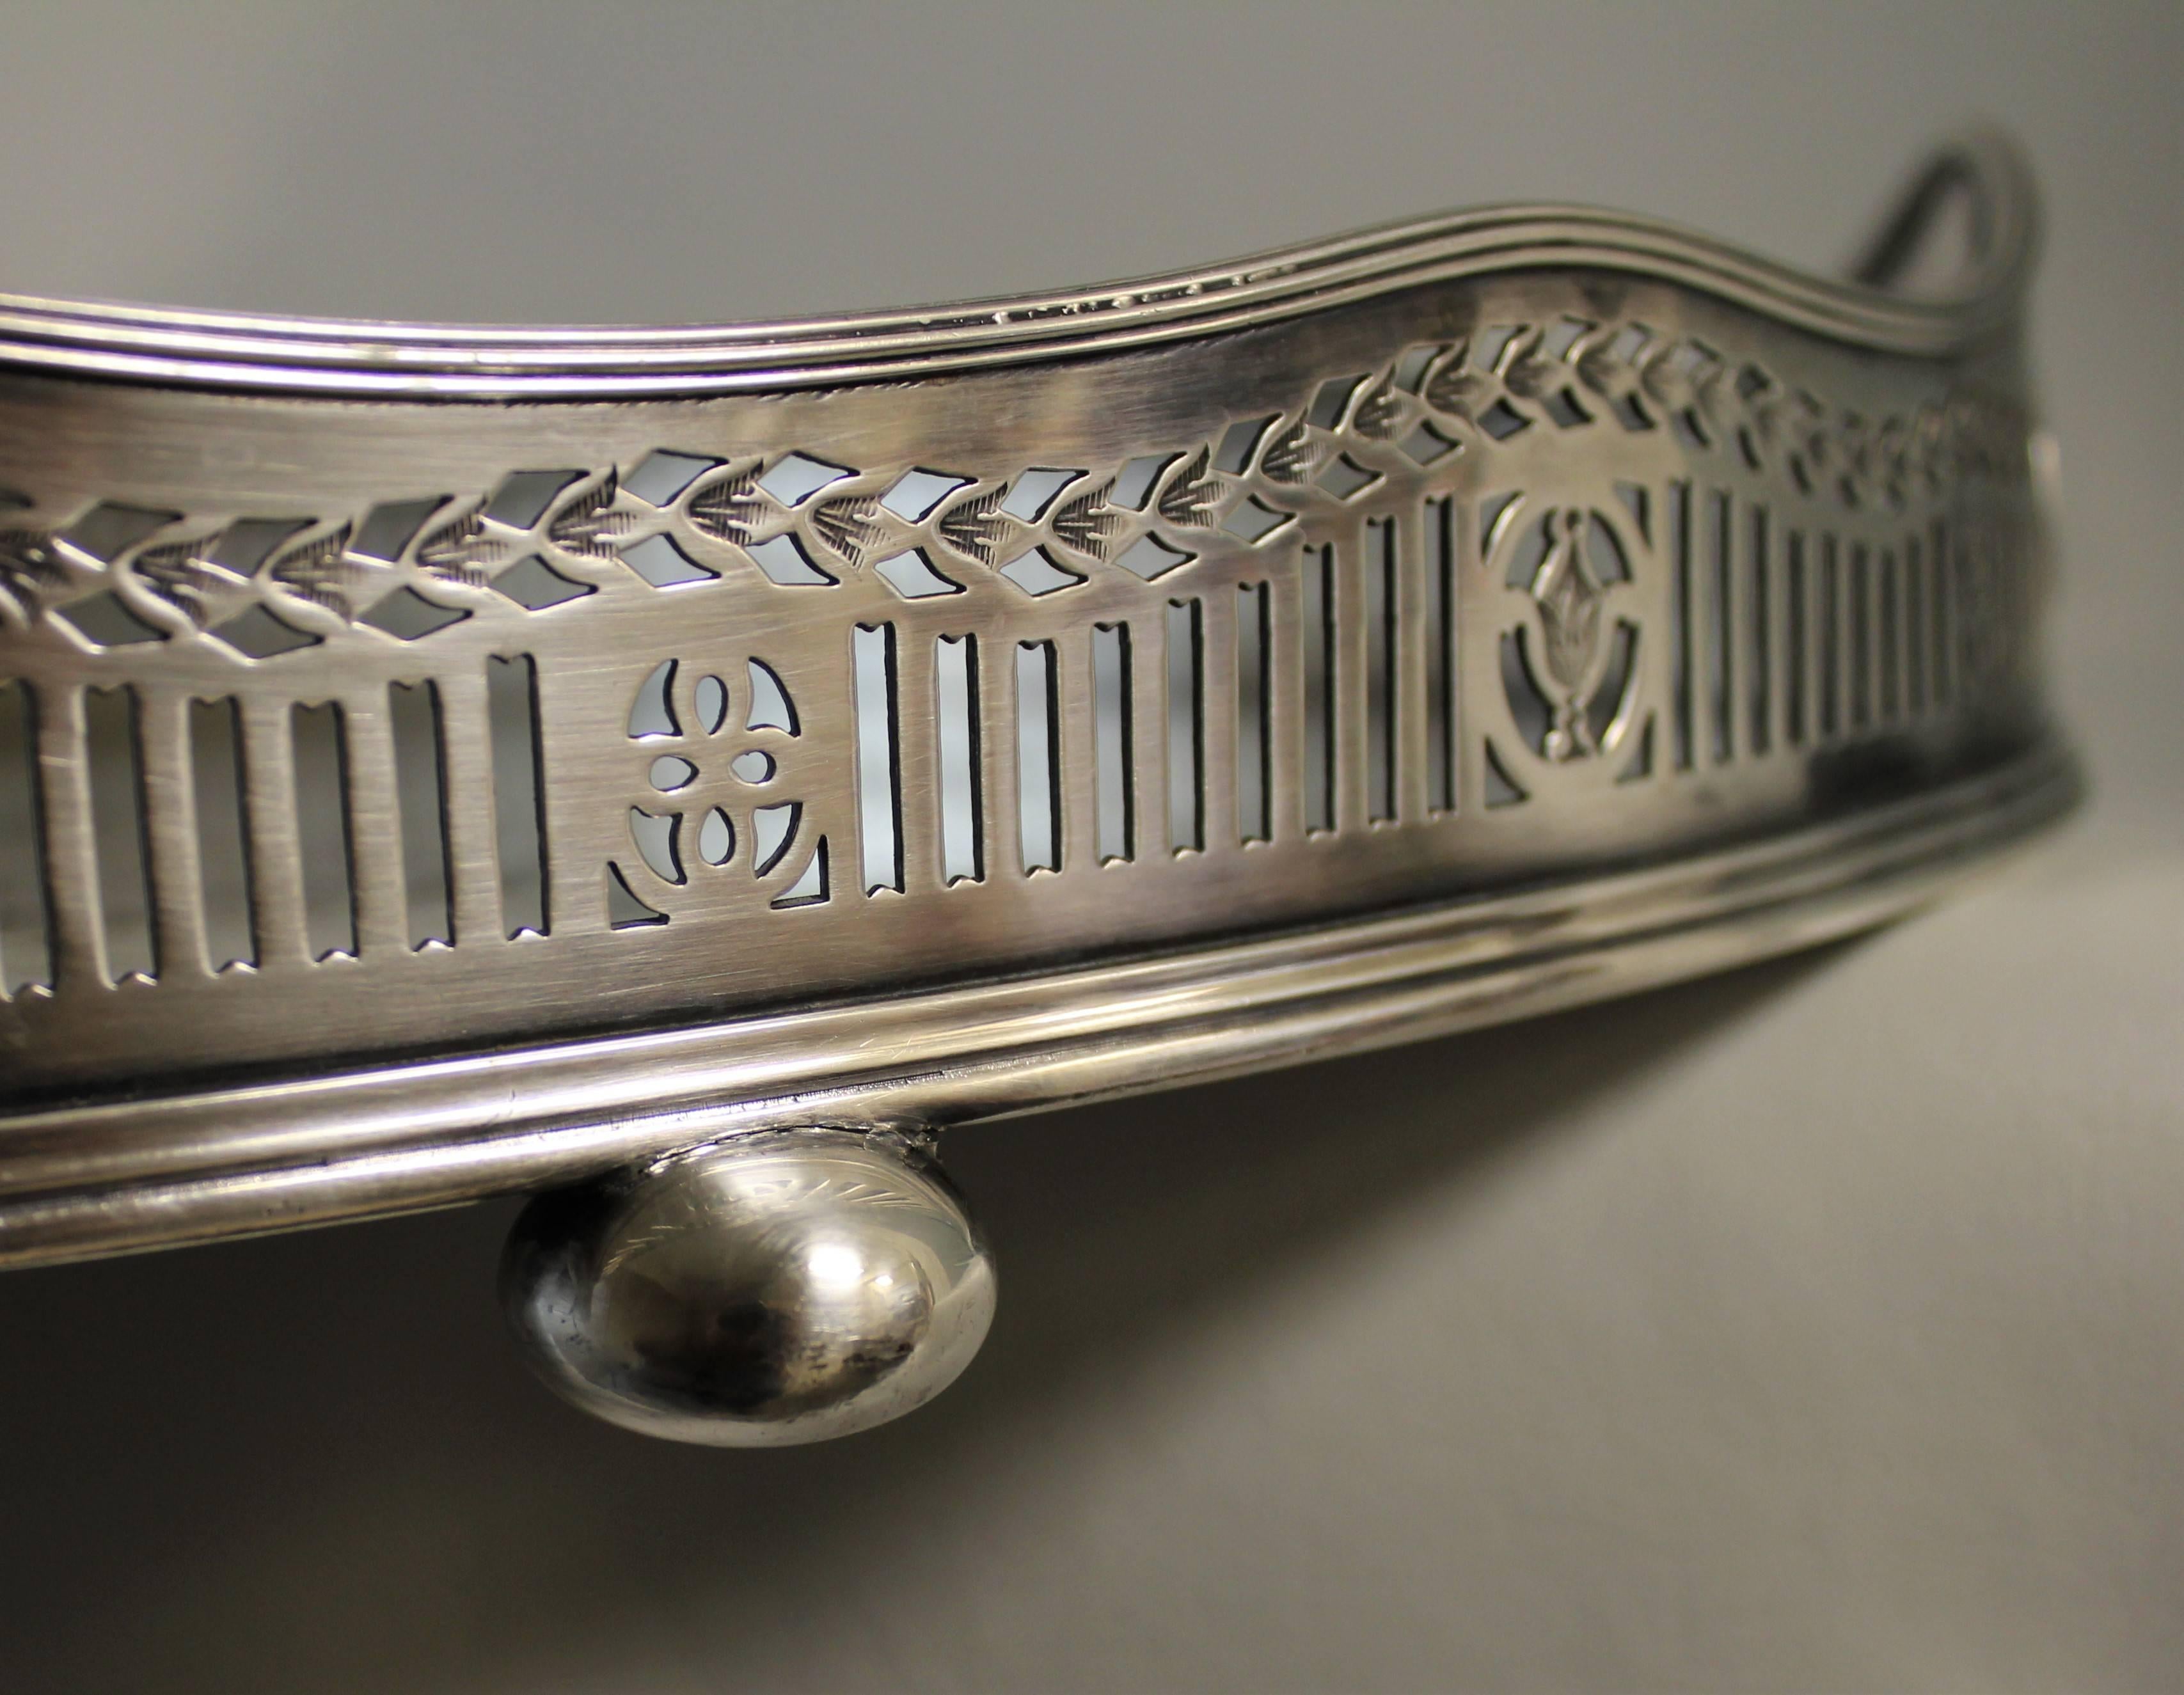 A magnificent large silver plated gallery tray made by top quality silversmiths Barker Ellis in Sheffield, England. The base of the tray is beautifully engraved with a scrolling pattern of flowers and leaves around a central cartouche. Inside the